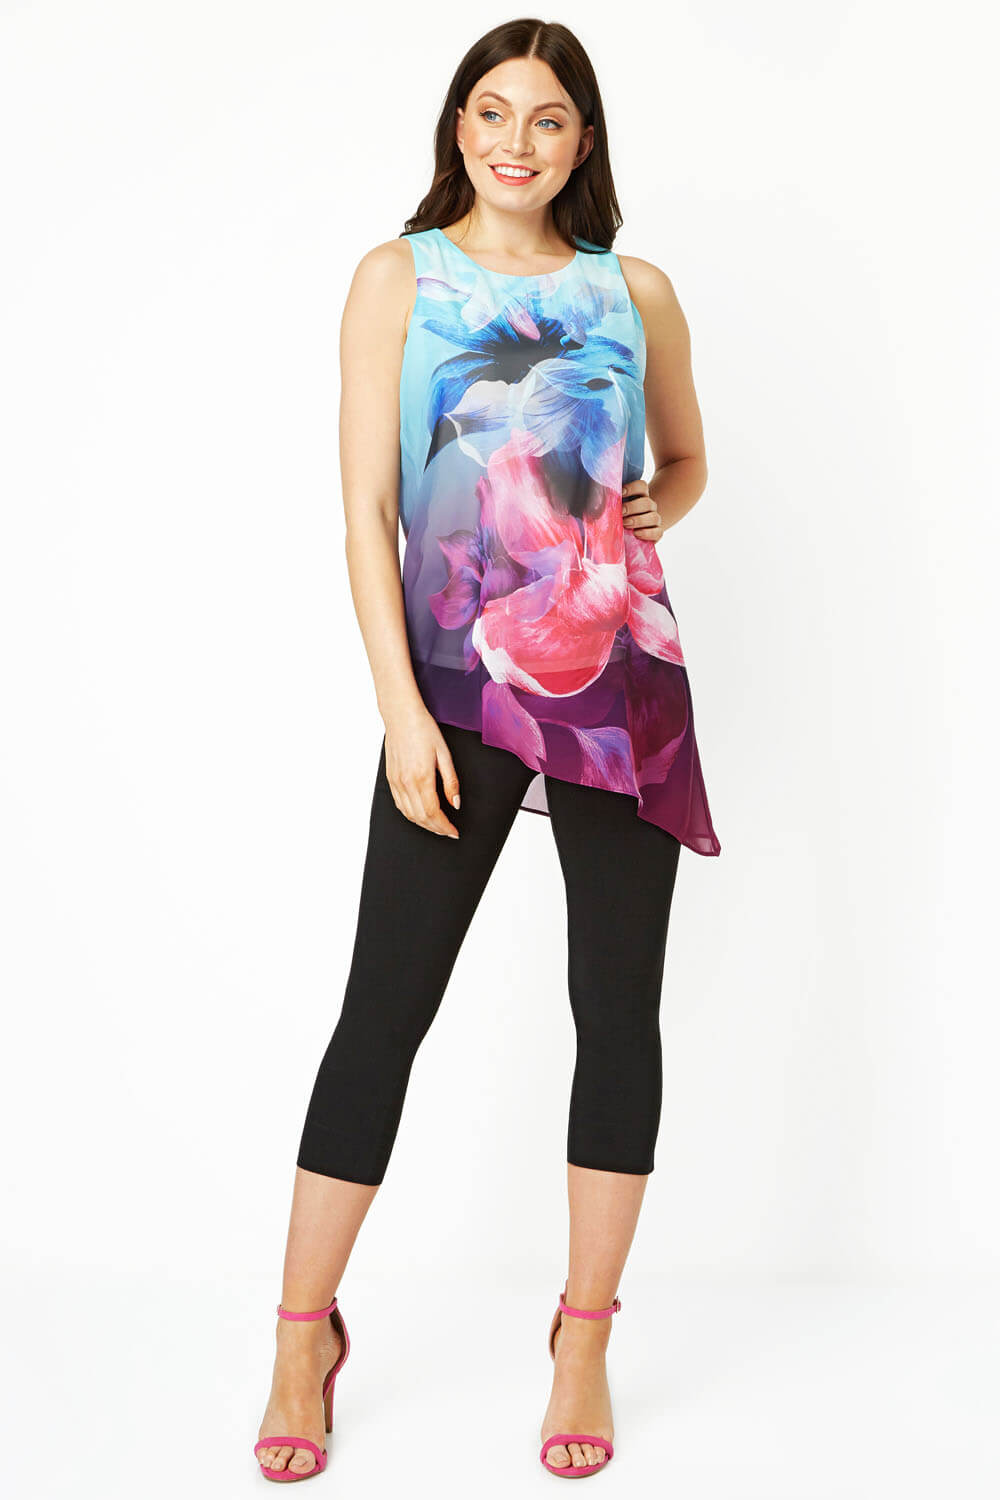 Turquoise Sleeveless Floral Print Chiffon Top, Image 2 of 8